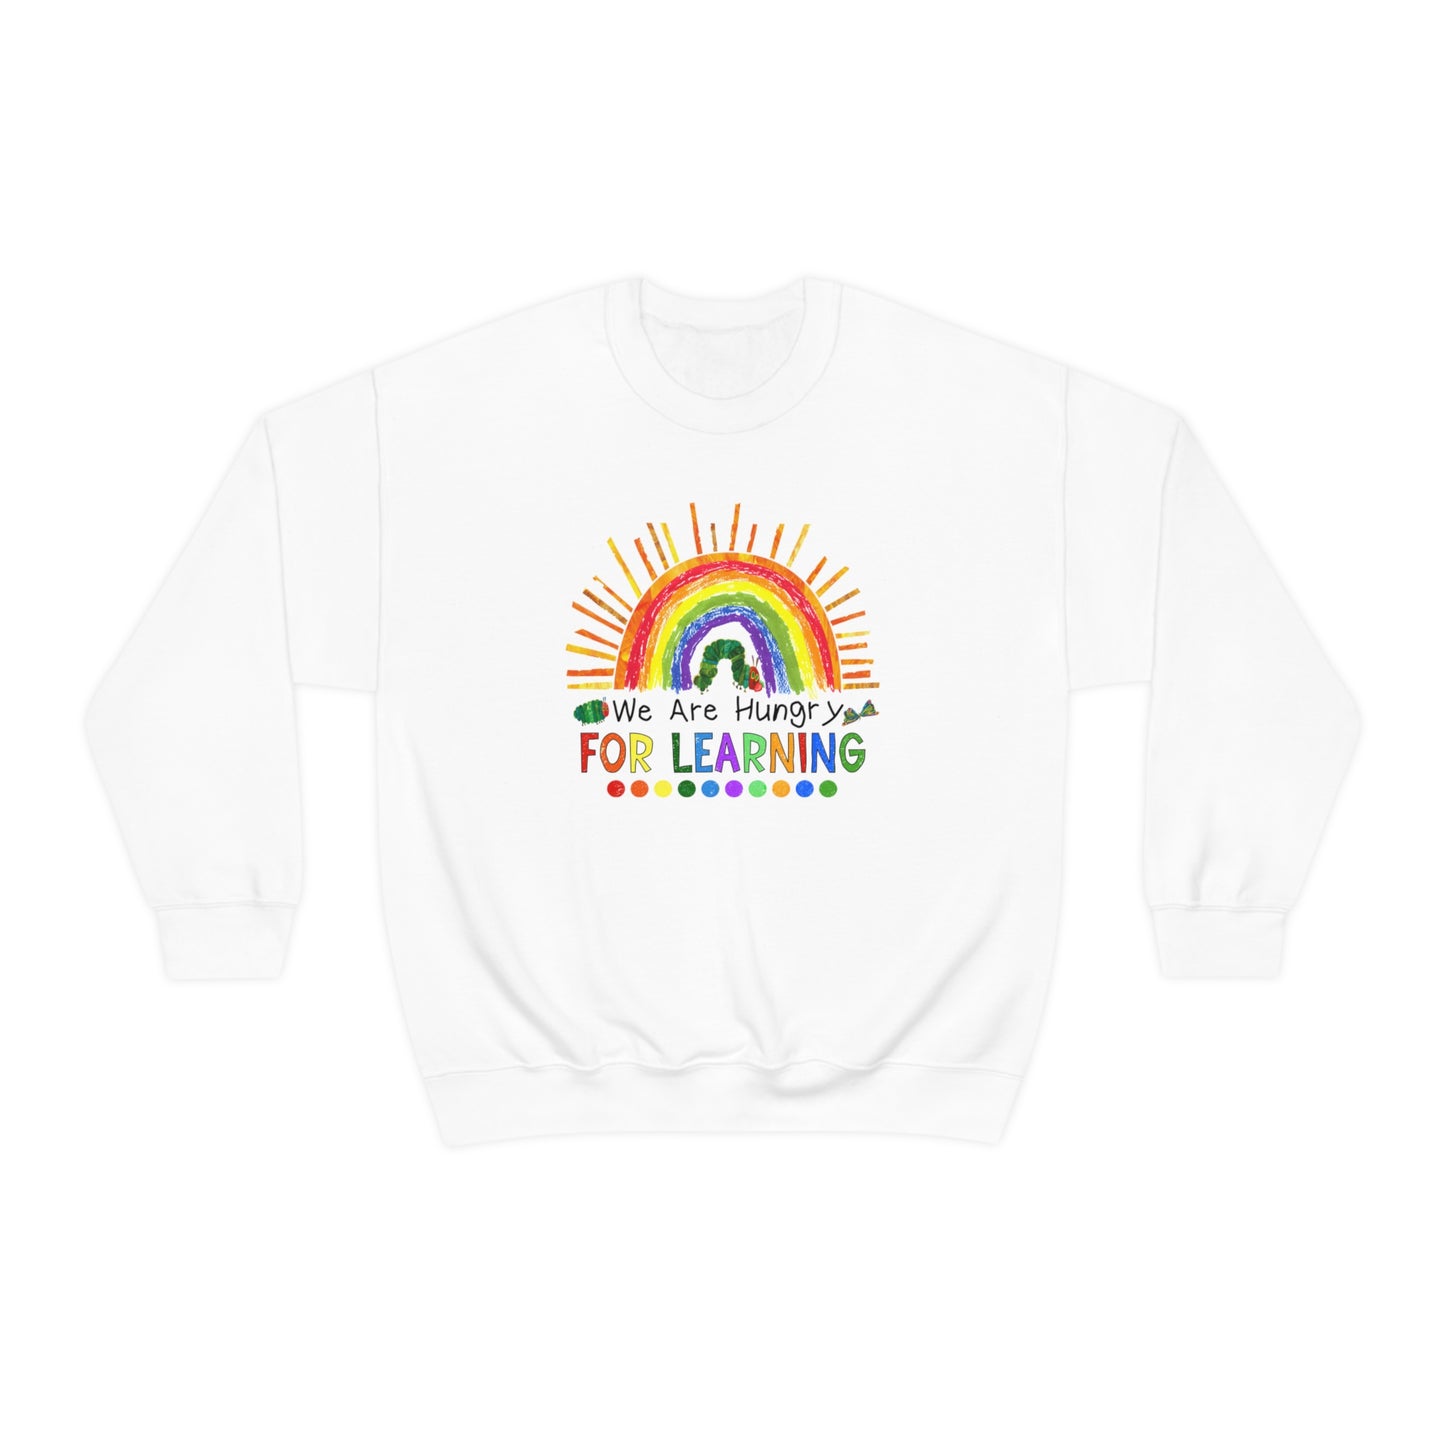 Hungry for Learning Sweatshirt